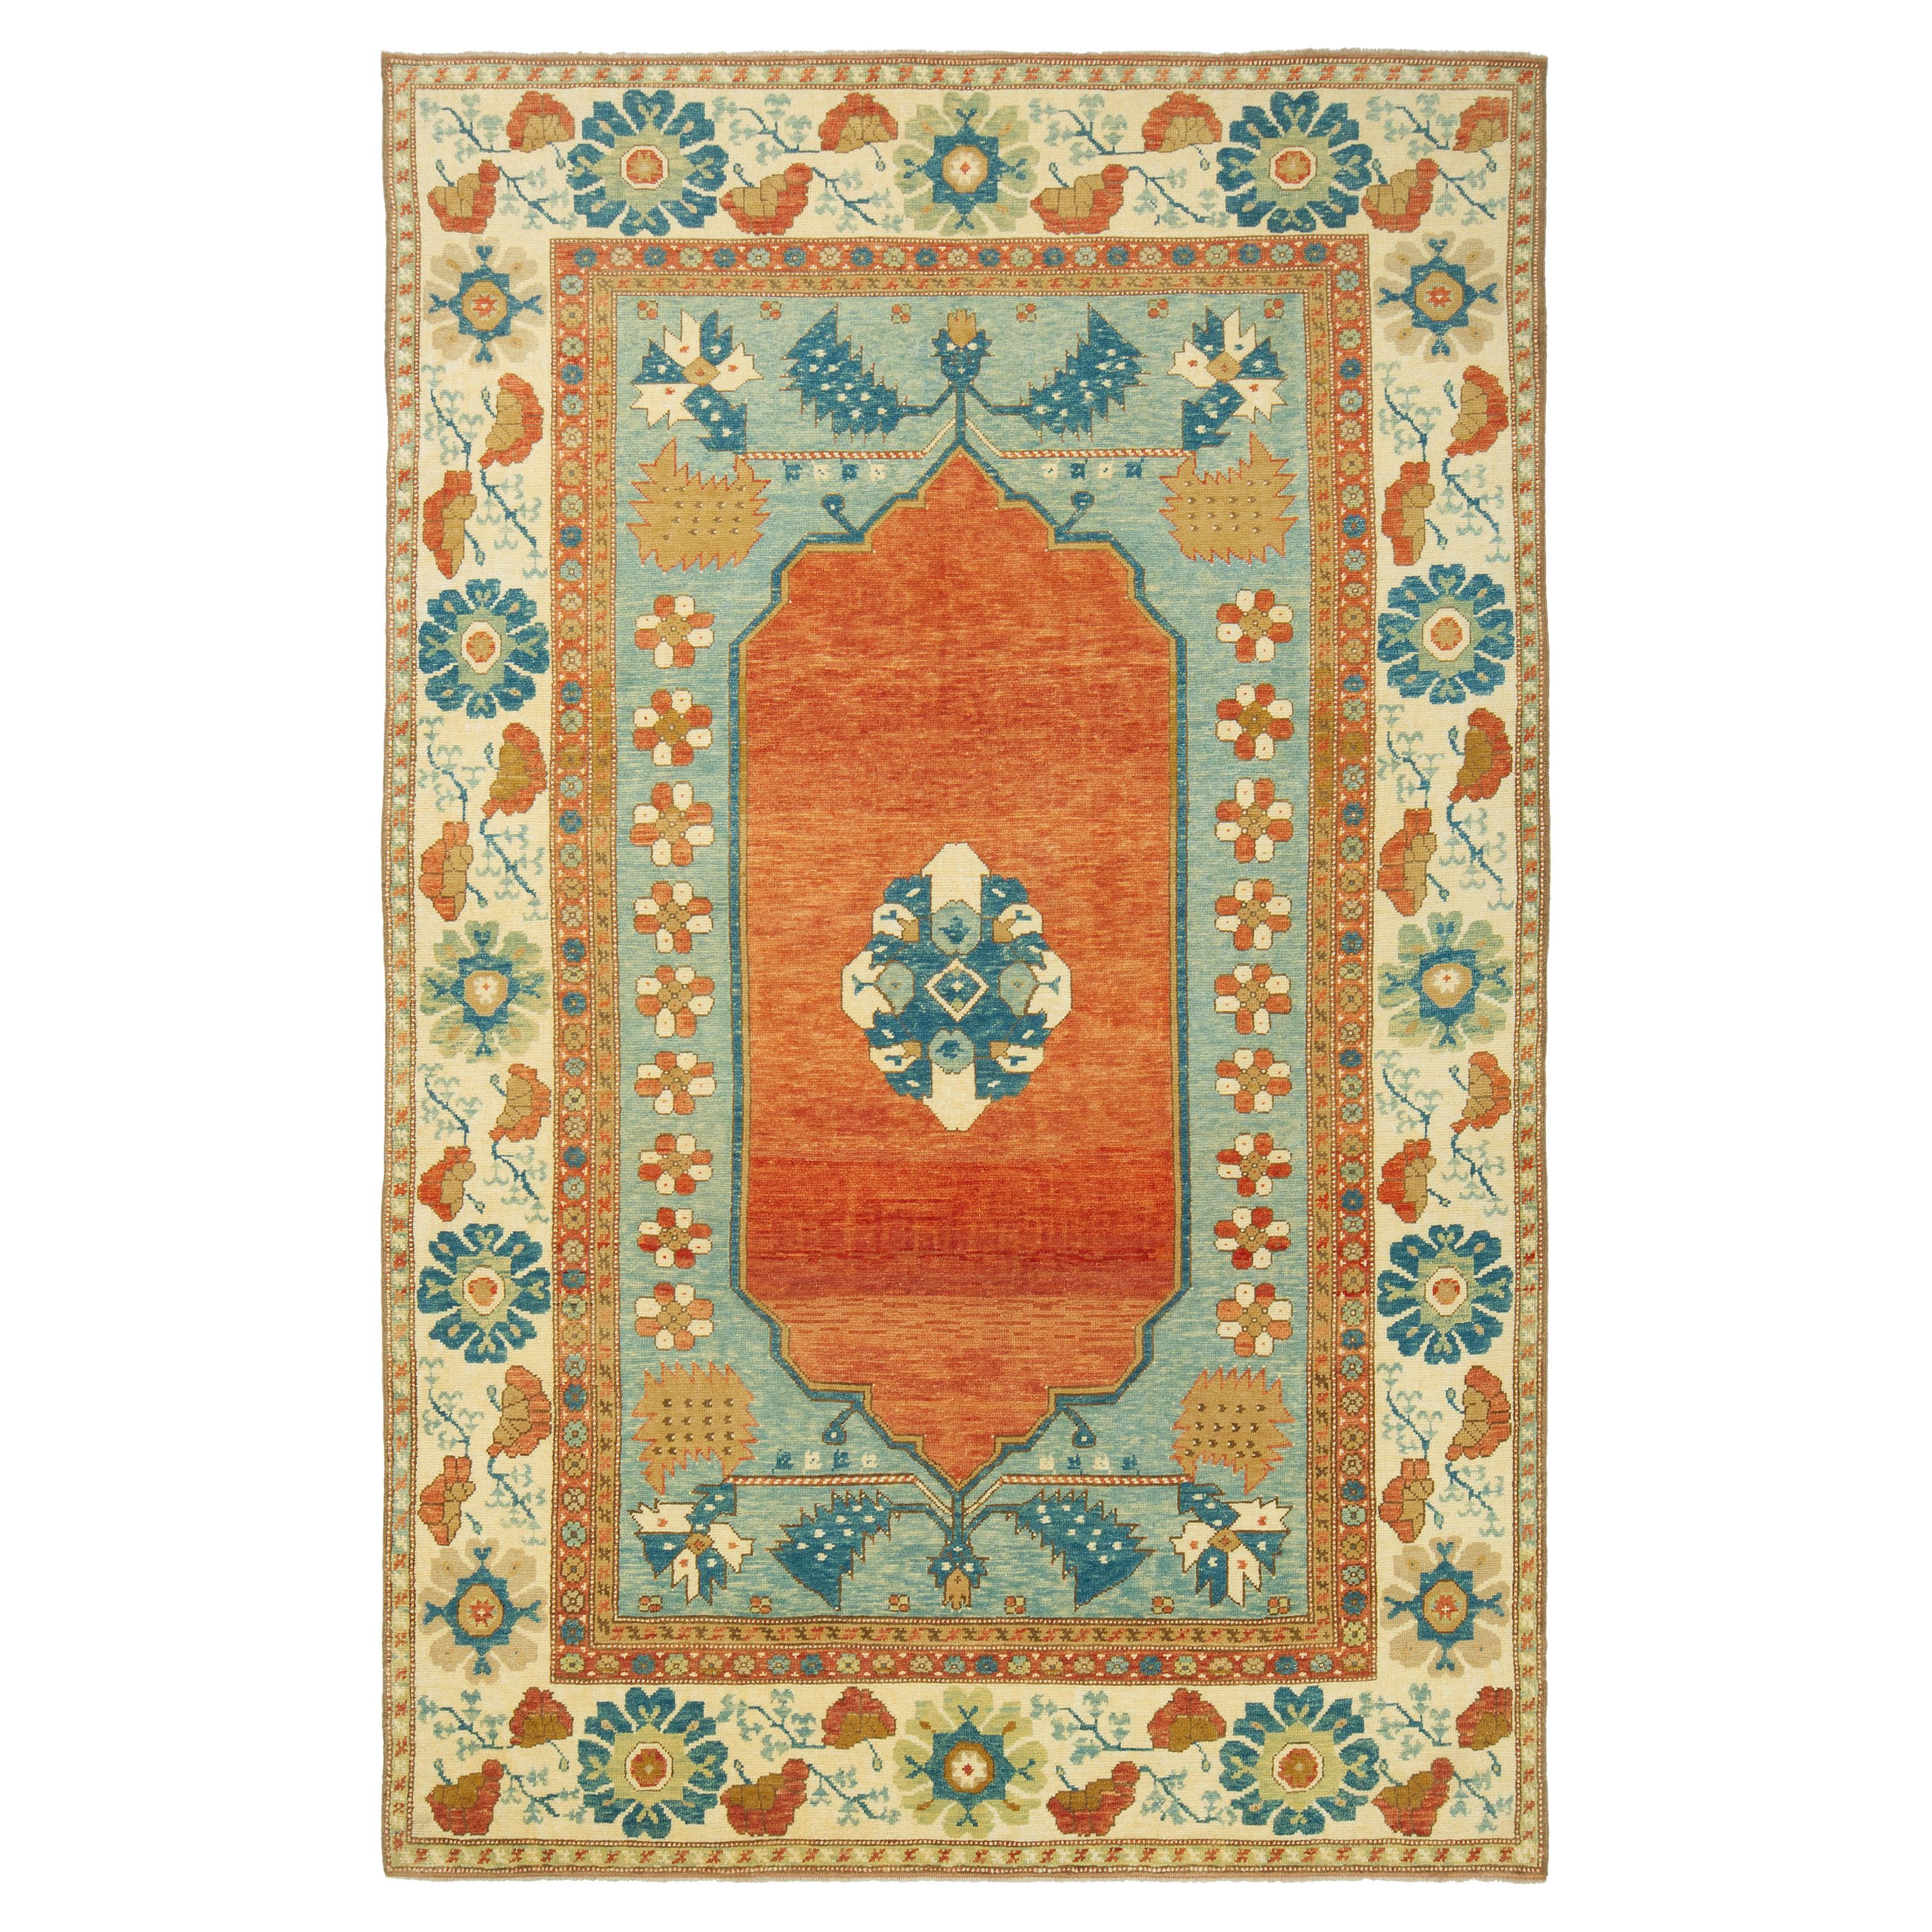 Ararat Rugs Medallion Rug 18th C Anatolian Turkish Revival Carpet Natural Dyed For Sale